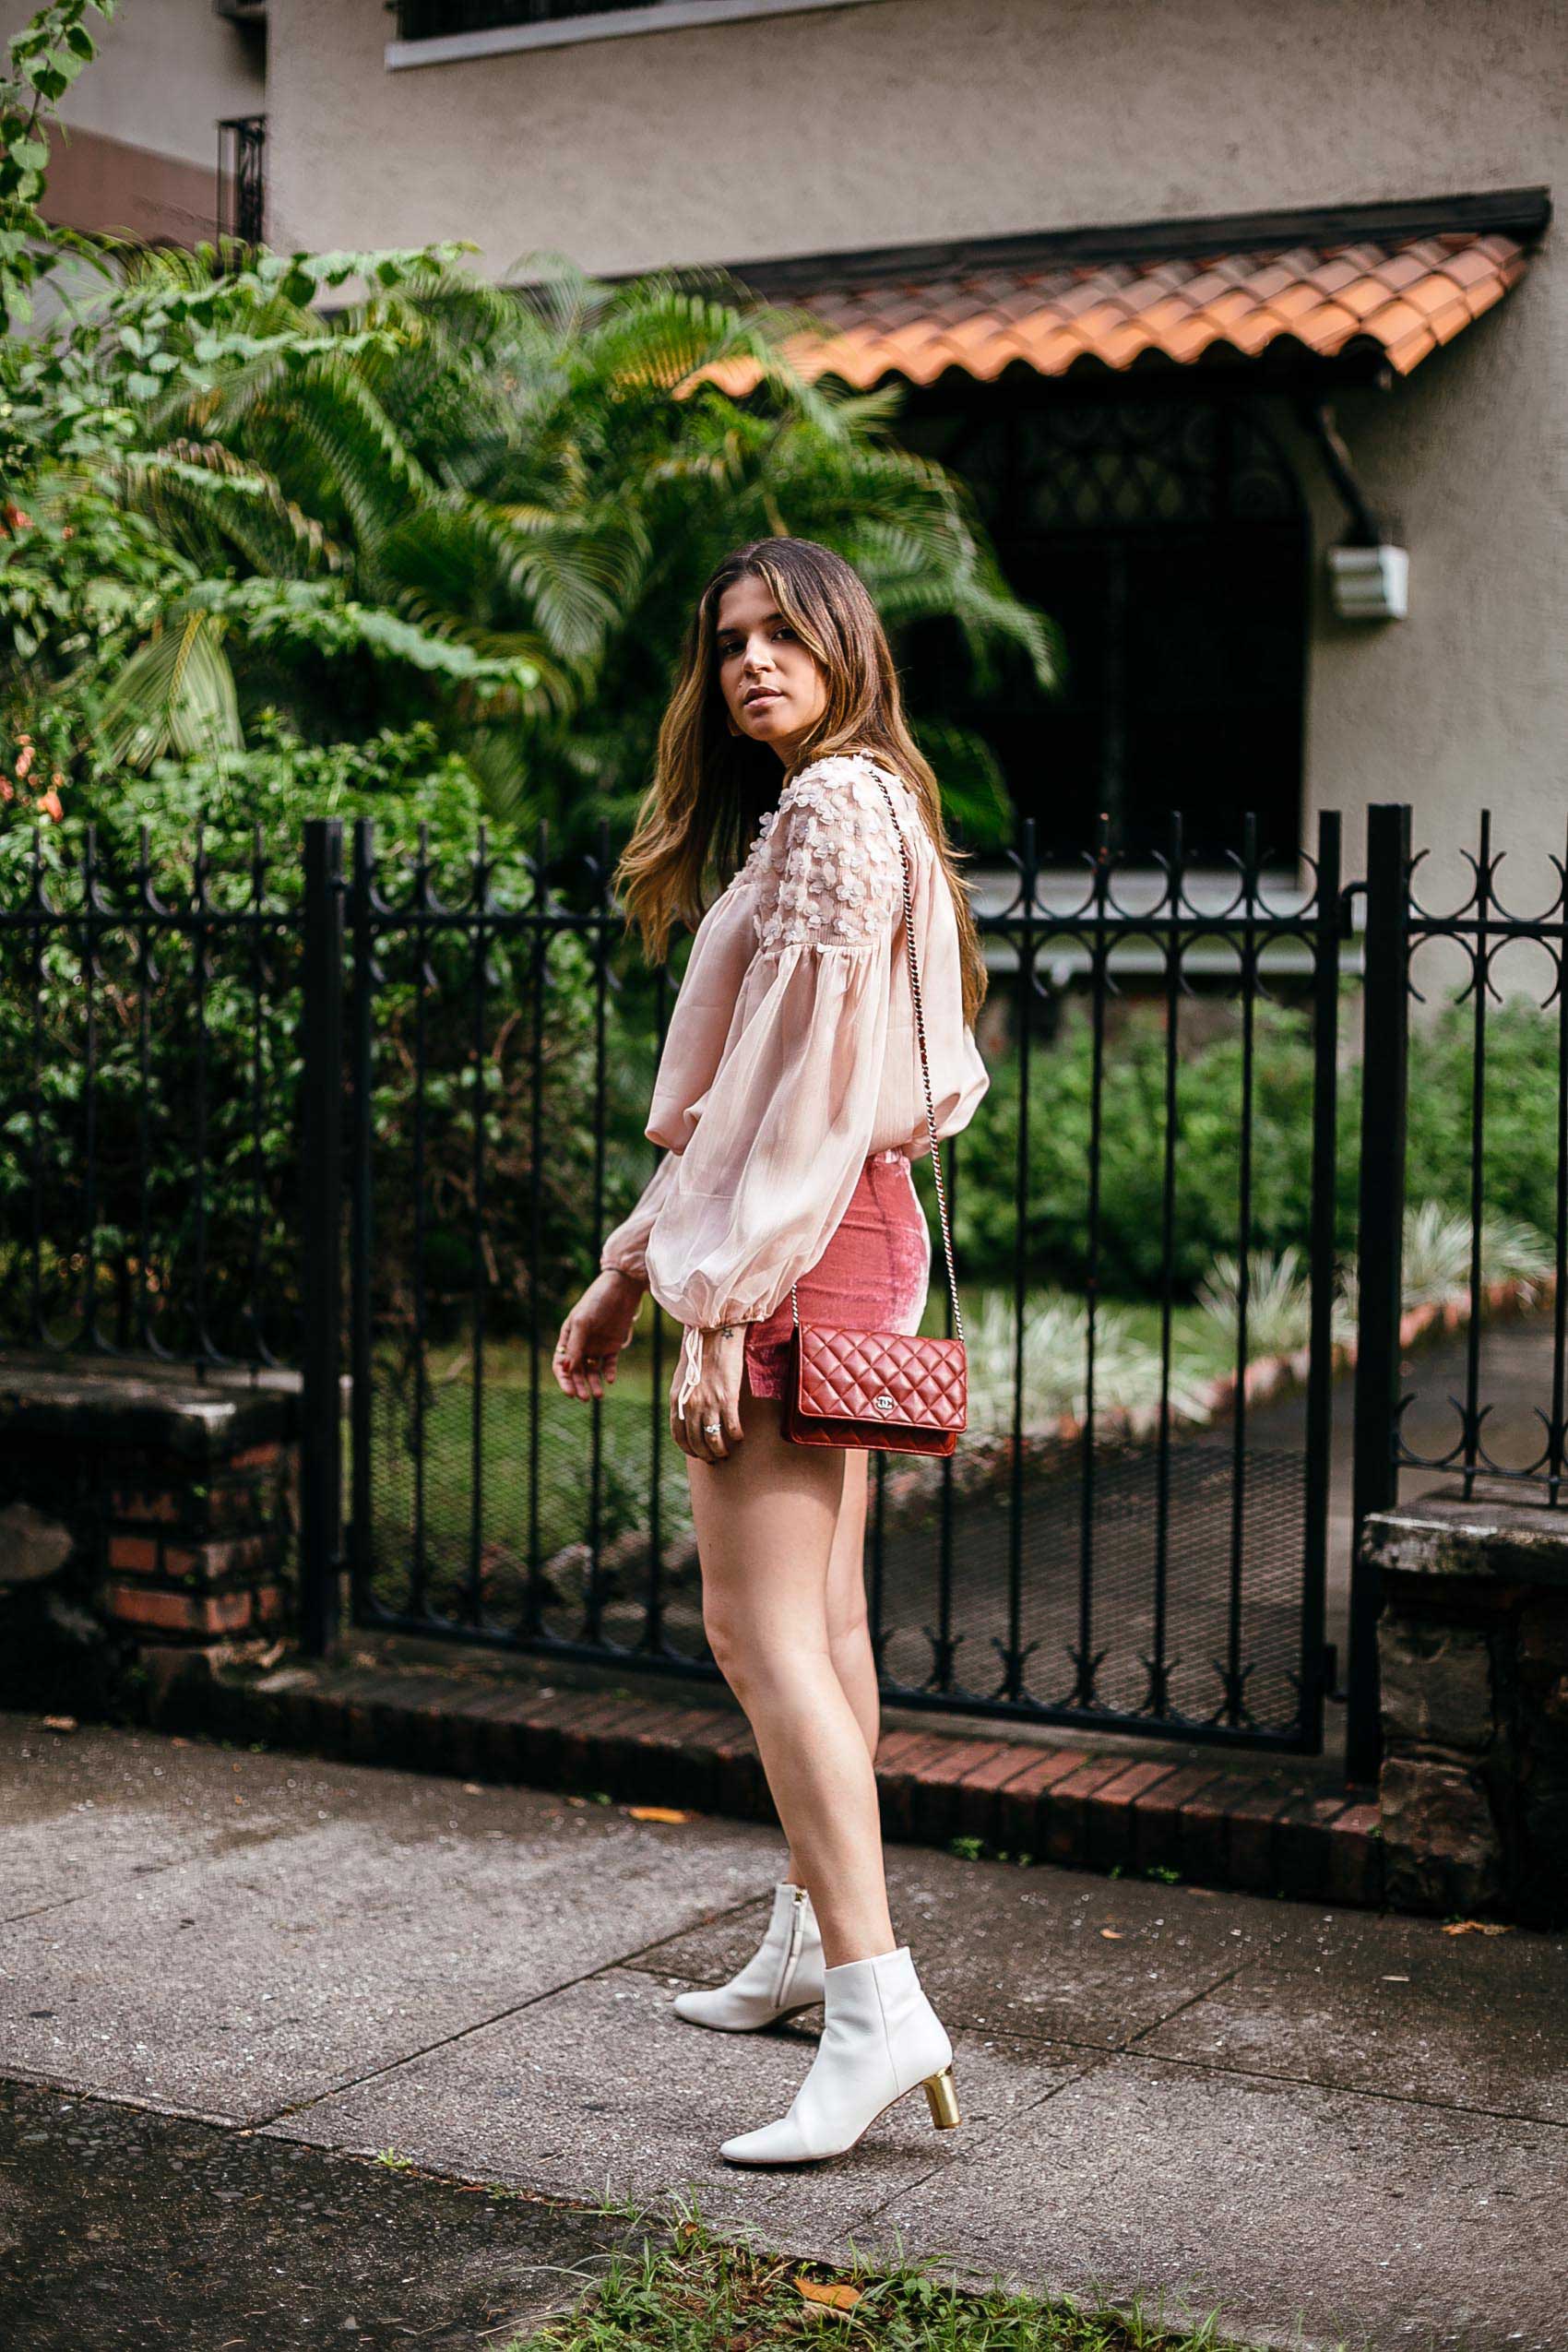 Maristella wearing a pink blouse, rose velvet shorts, white boots and red Chanel bag